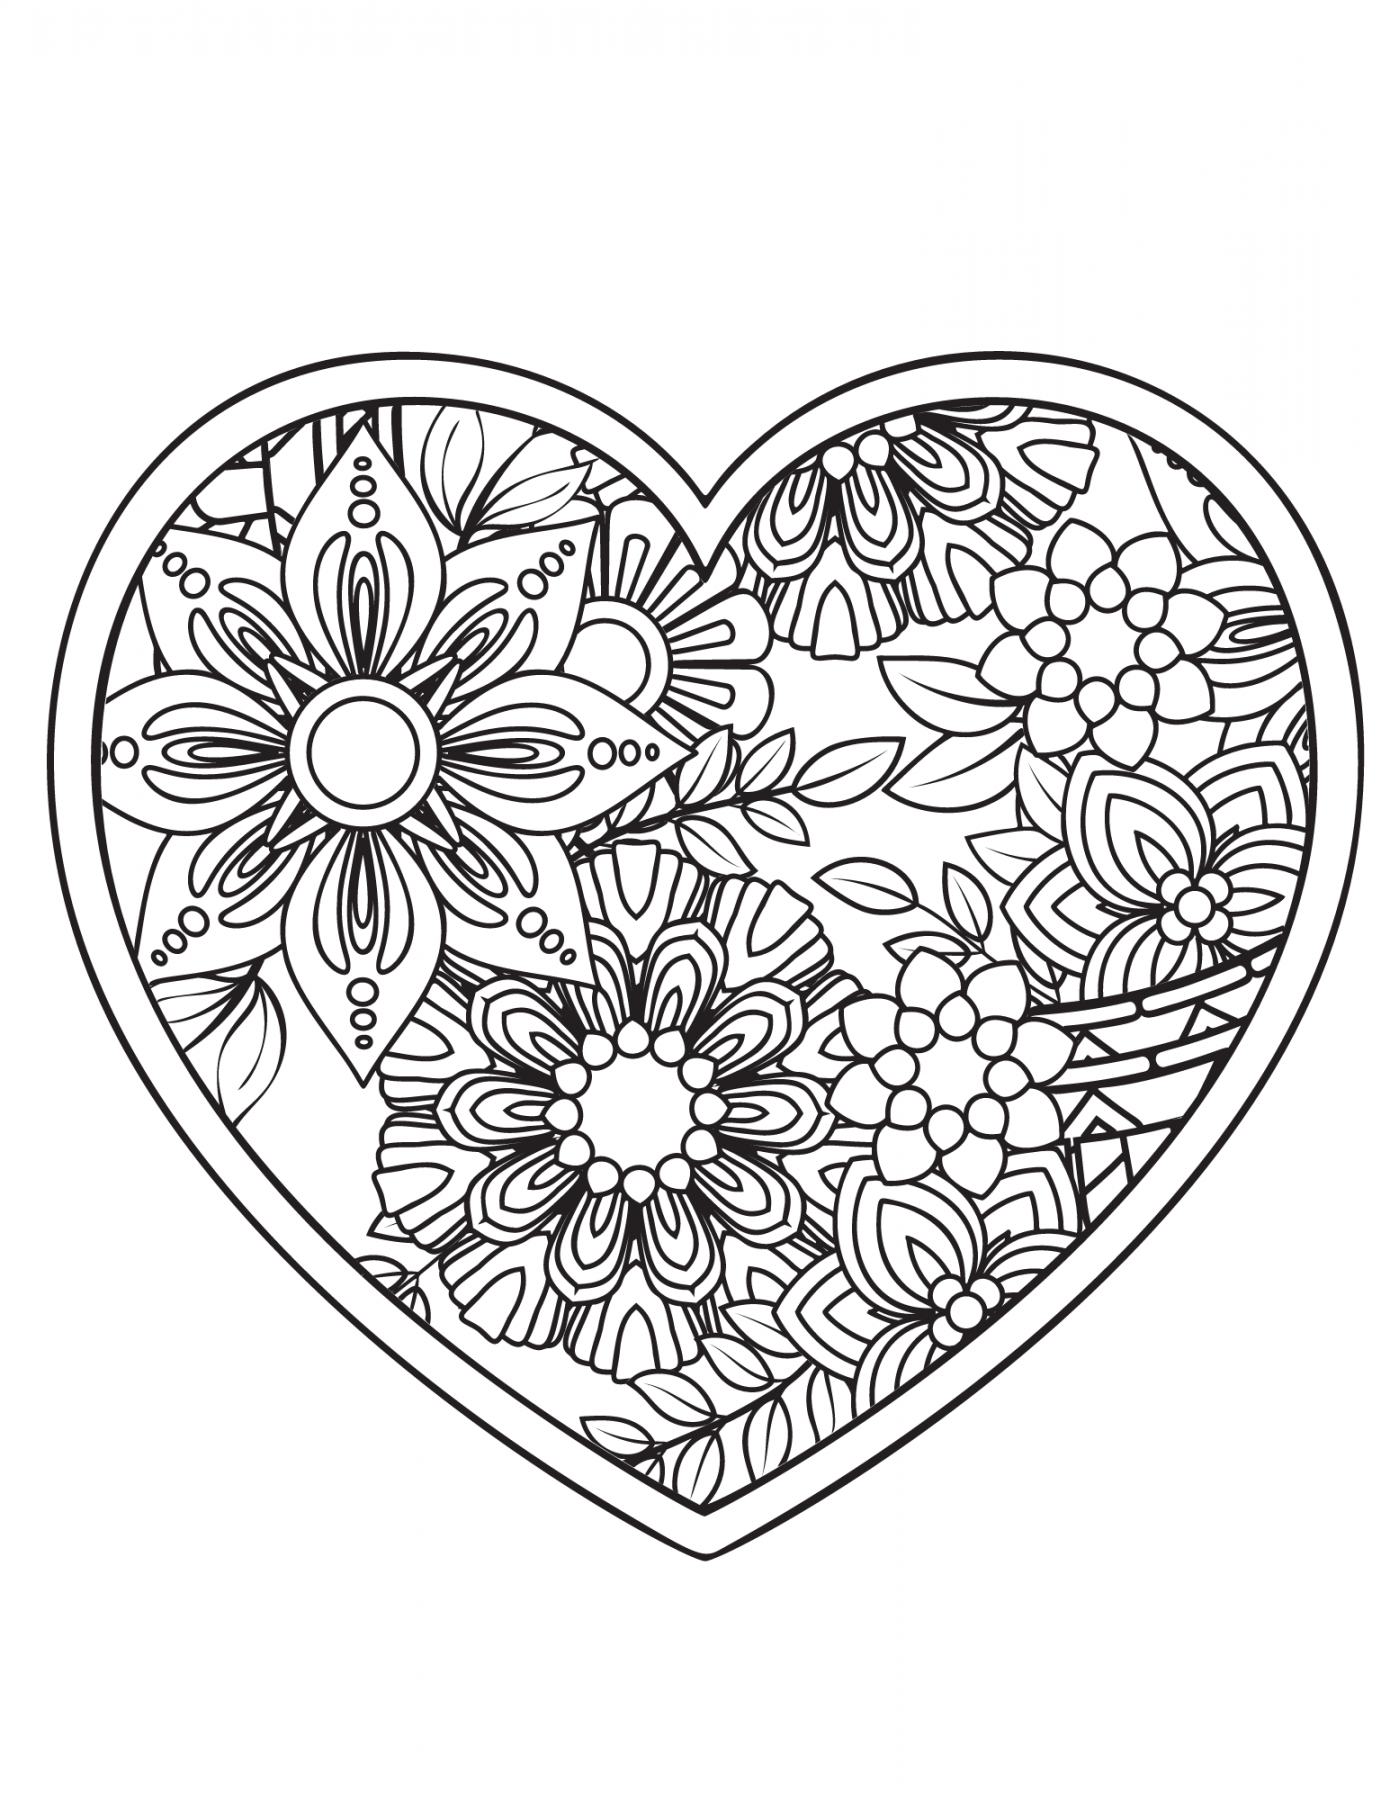 Free Printable Heart Coloring Pages - Printable - Free Printable Heart Coloring Pages for Kids and Adults